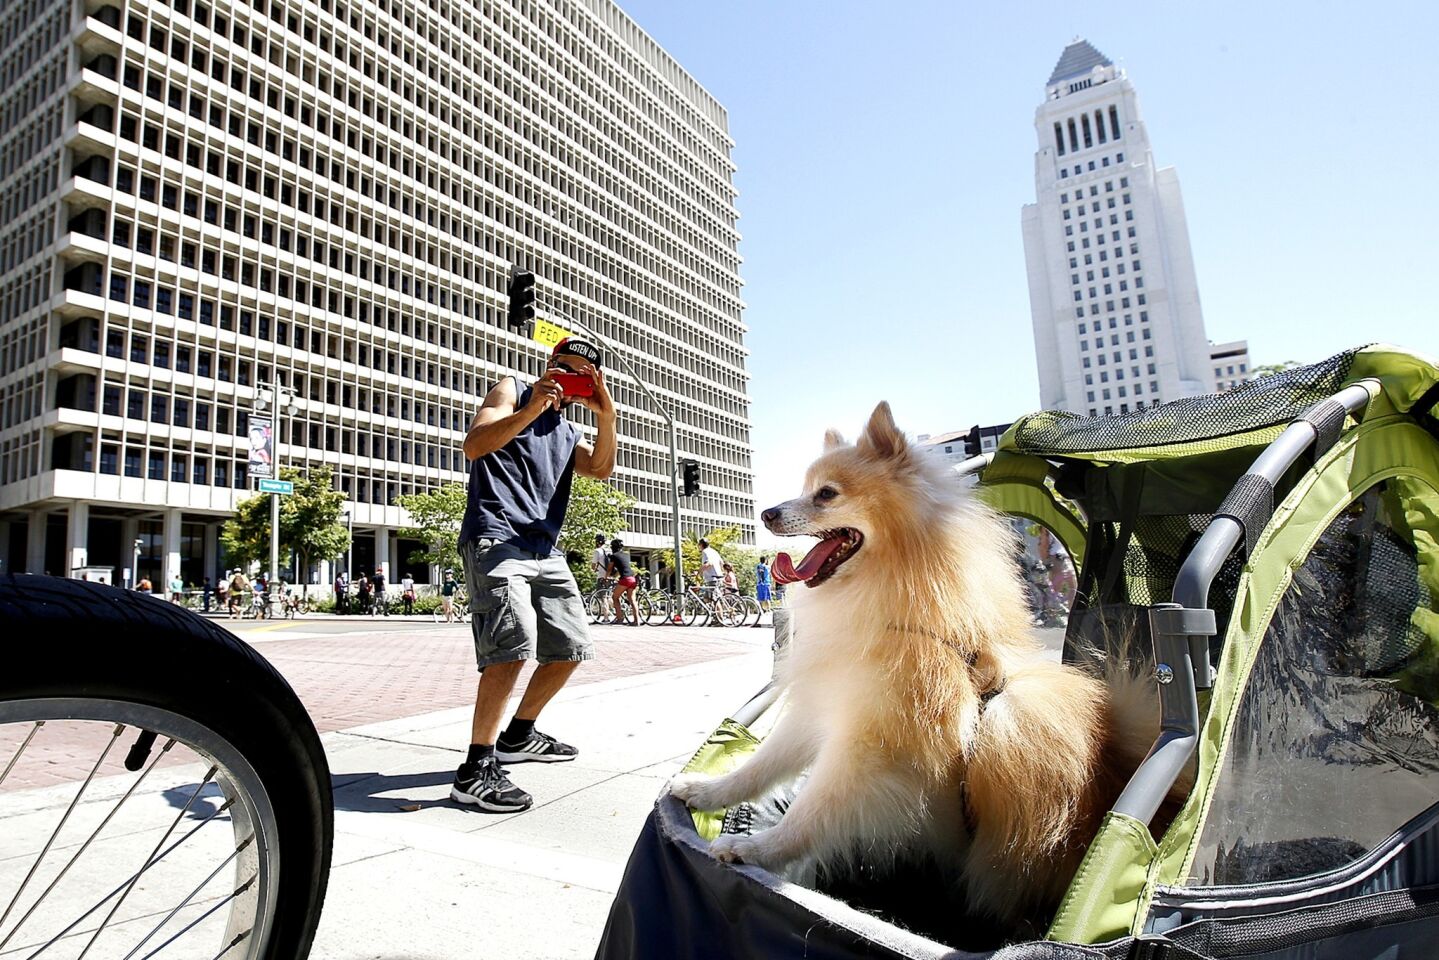 A Pomeranian finds a good seat to take in CicLAvia.